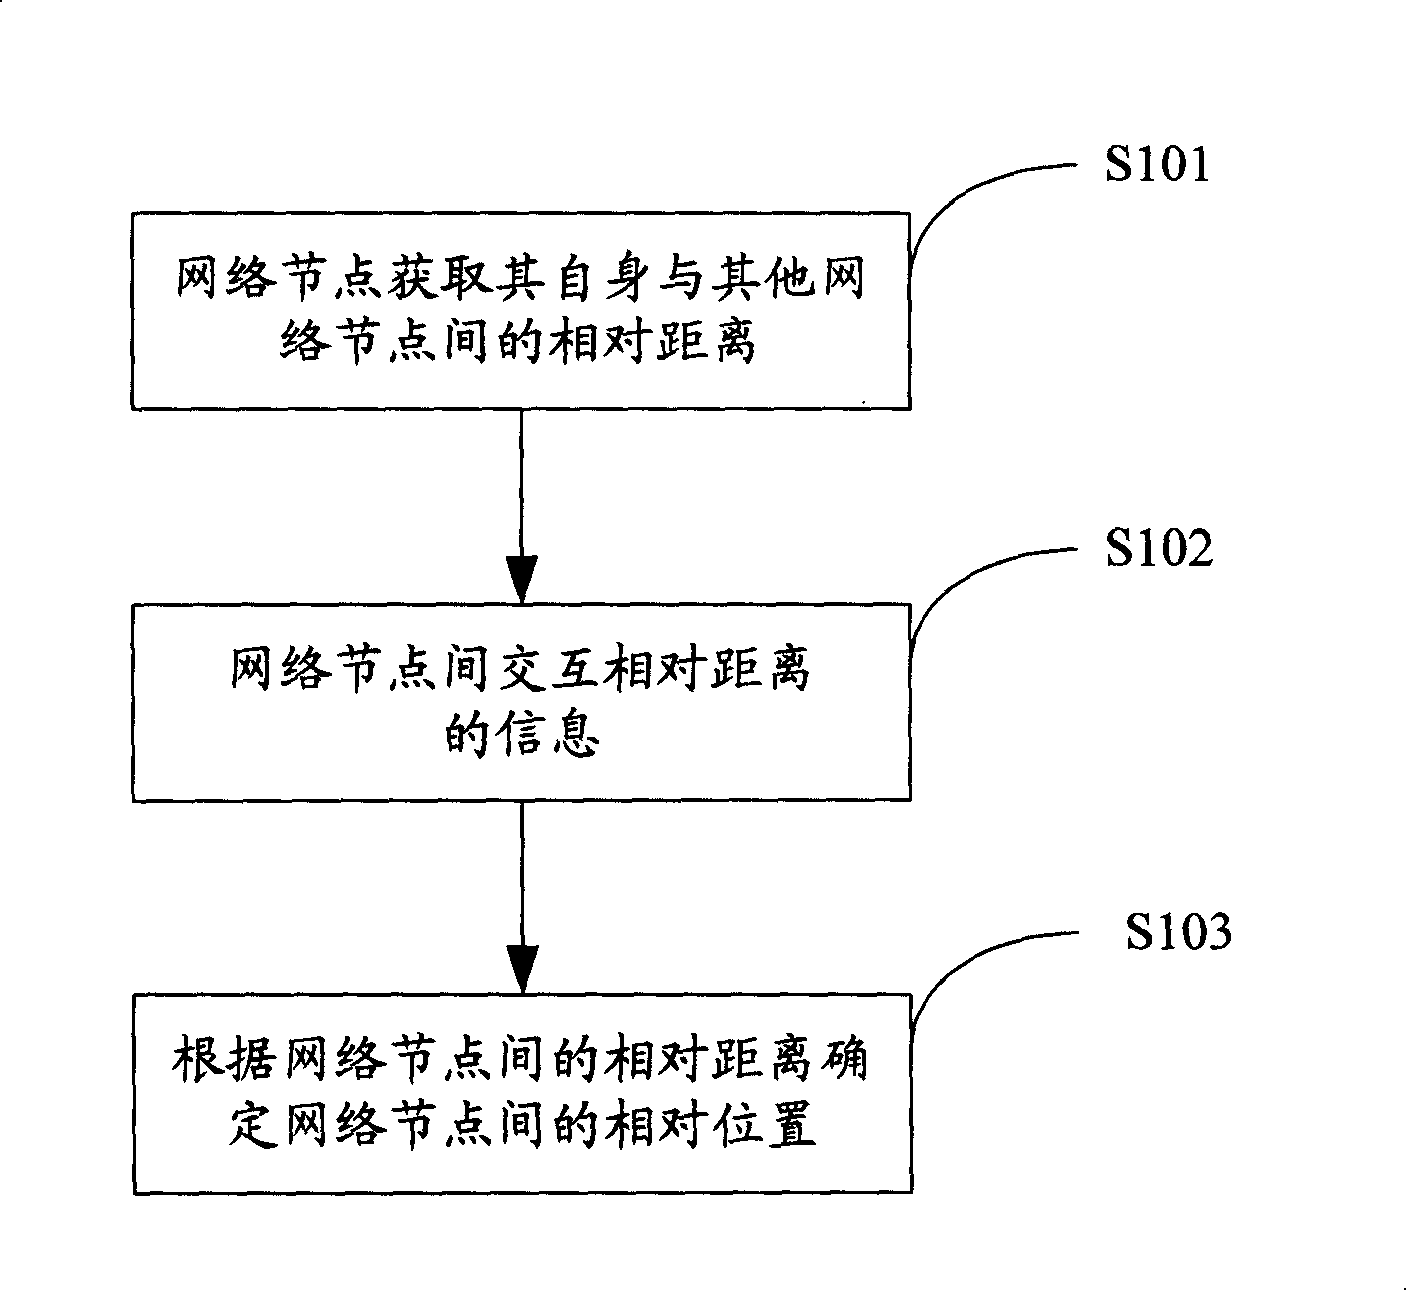 Method and system for ascertaining relative position of network node